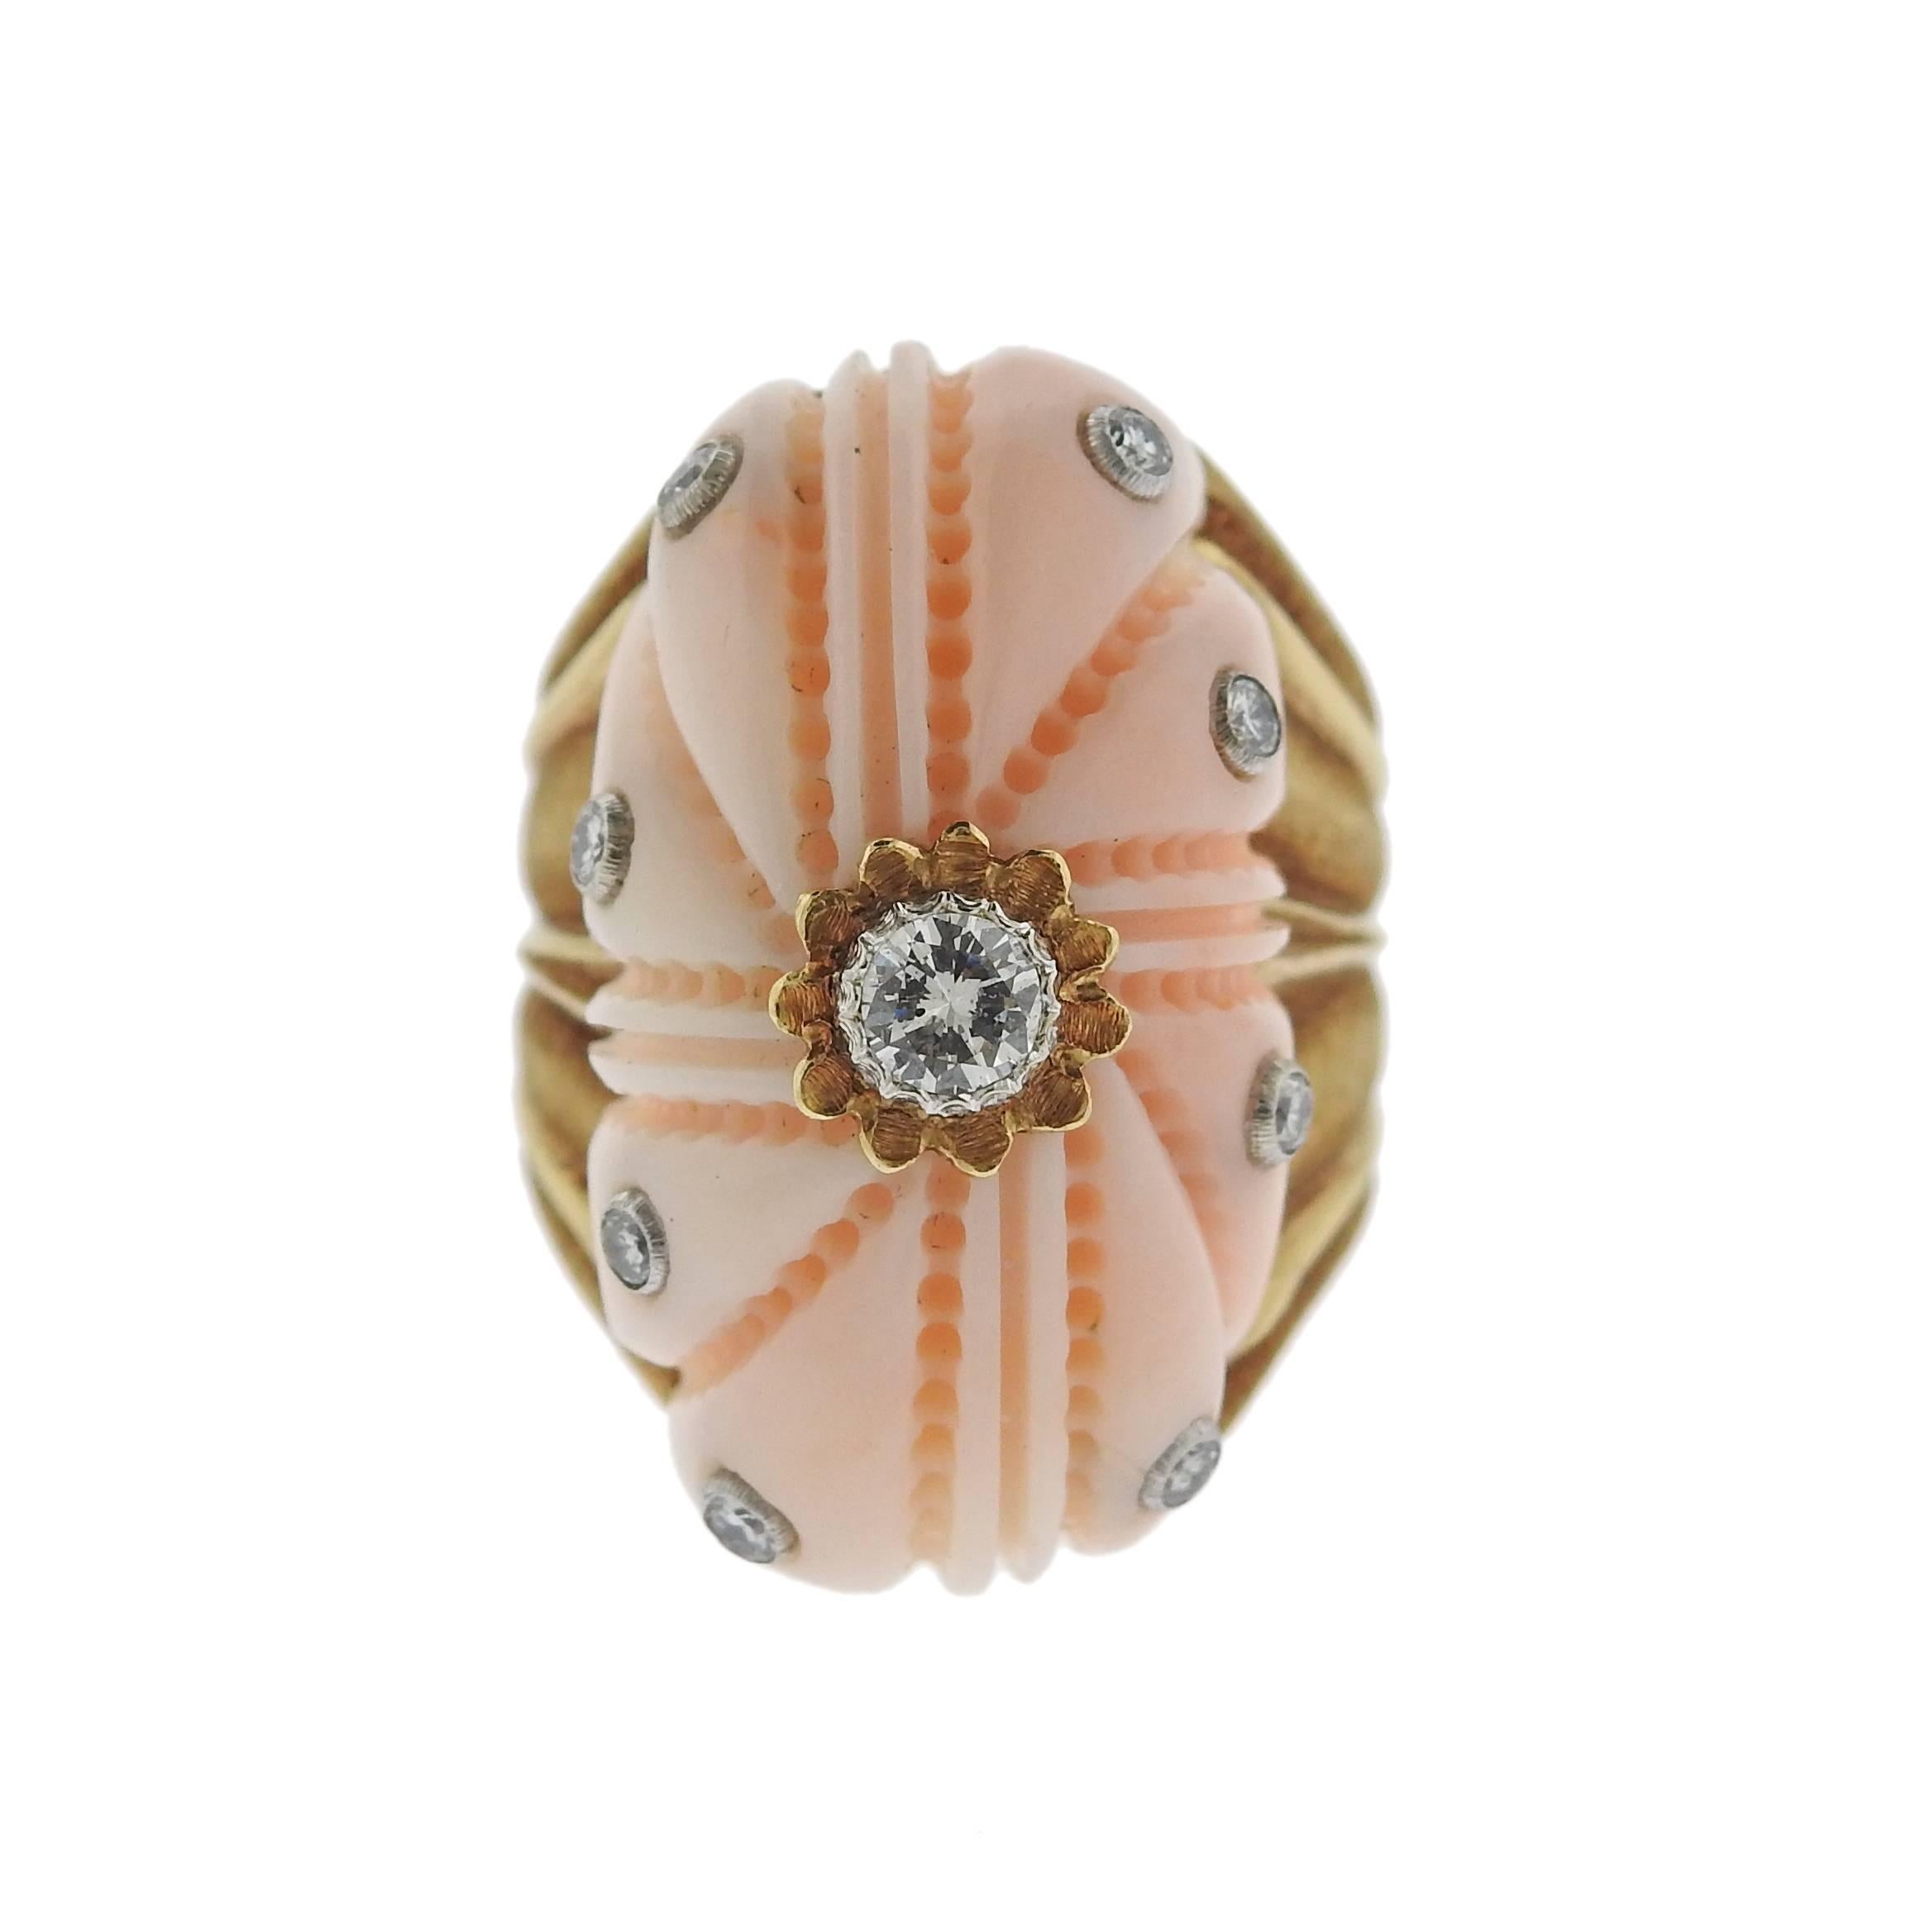 Beautiful 18k yellow gold ring, crafted by Buccellati, decorated with carved coral and approximately 0.40ctw in diamonds. Ring size 7, ring top is 28mm wide. Marked: Buccellati, Italy, 18k. Weight of the piece - 21.5 grams. 